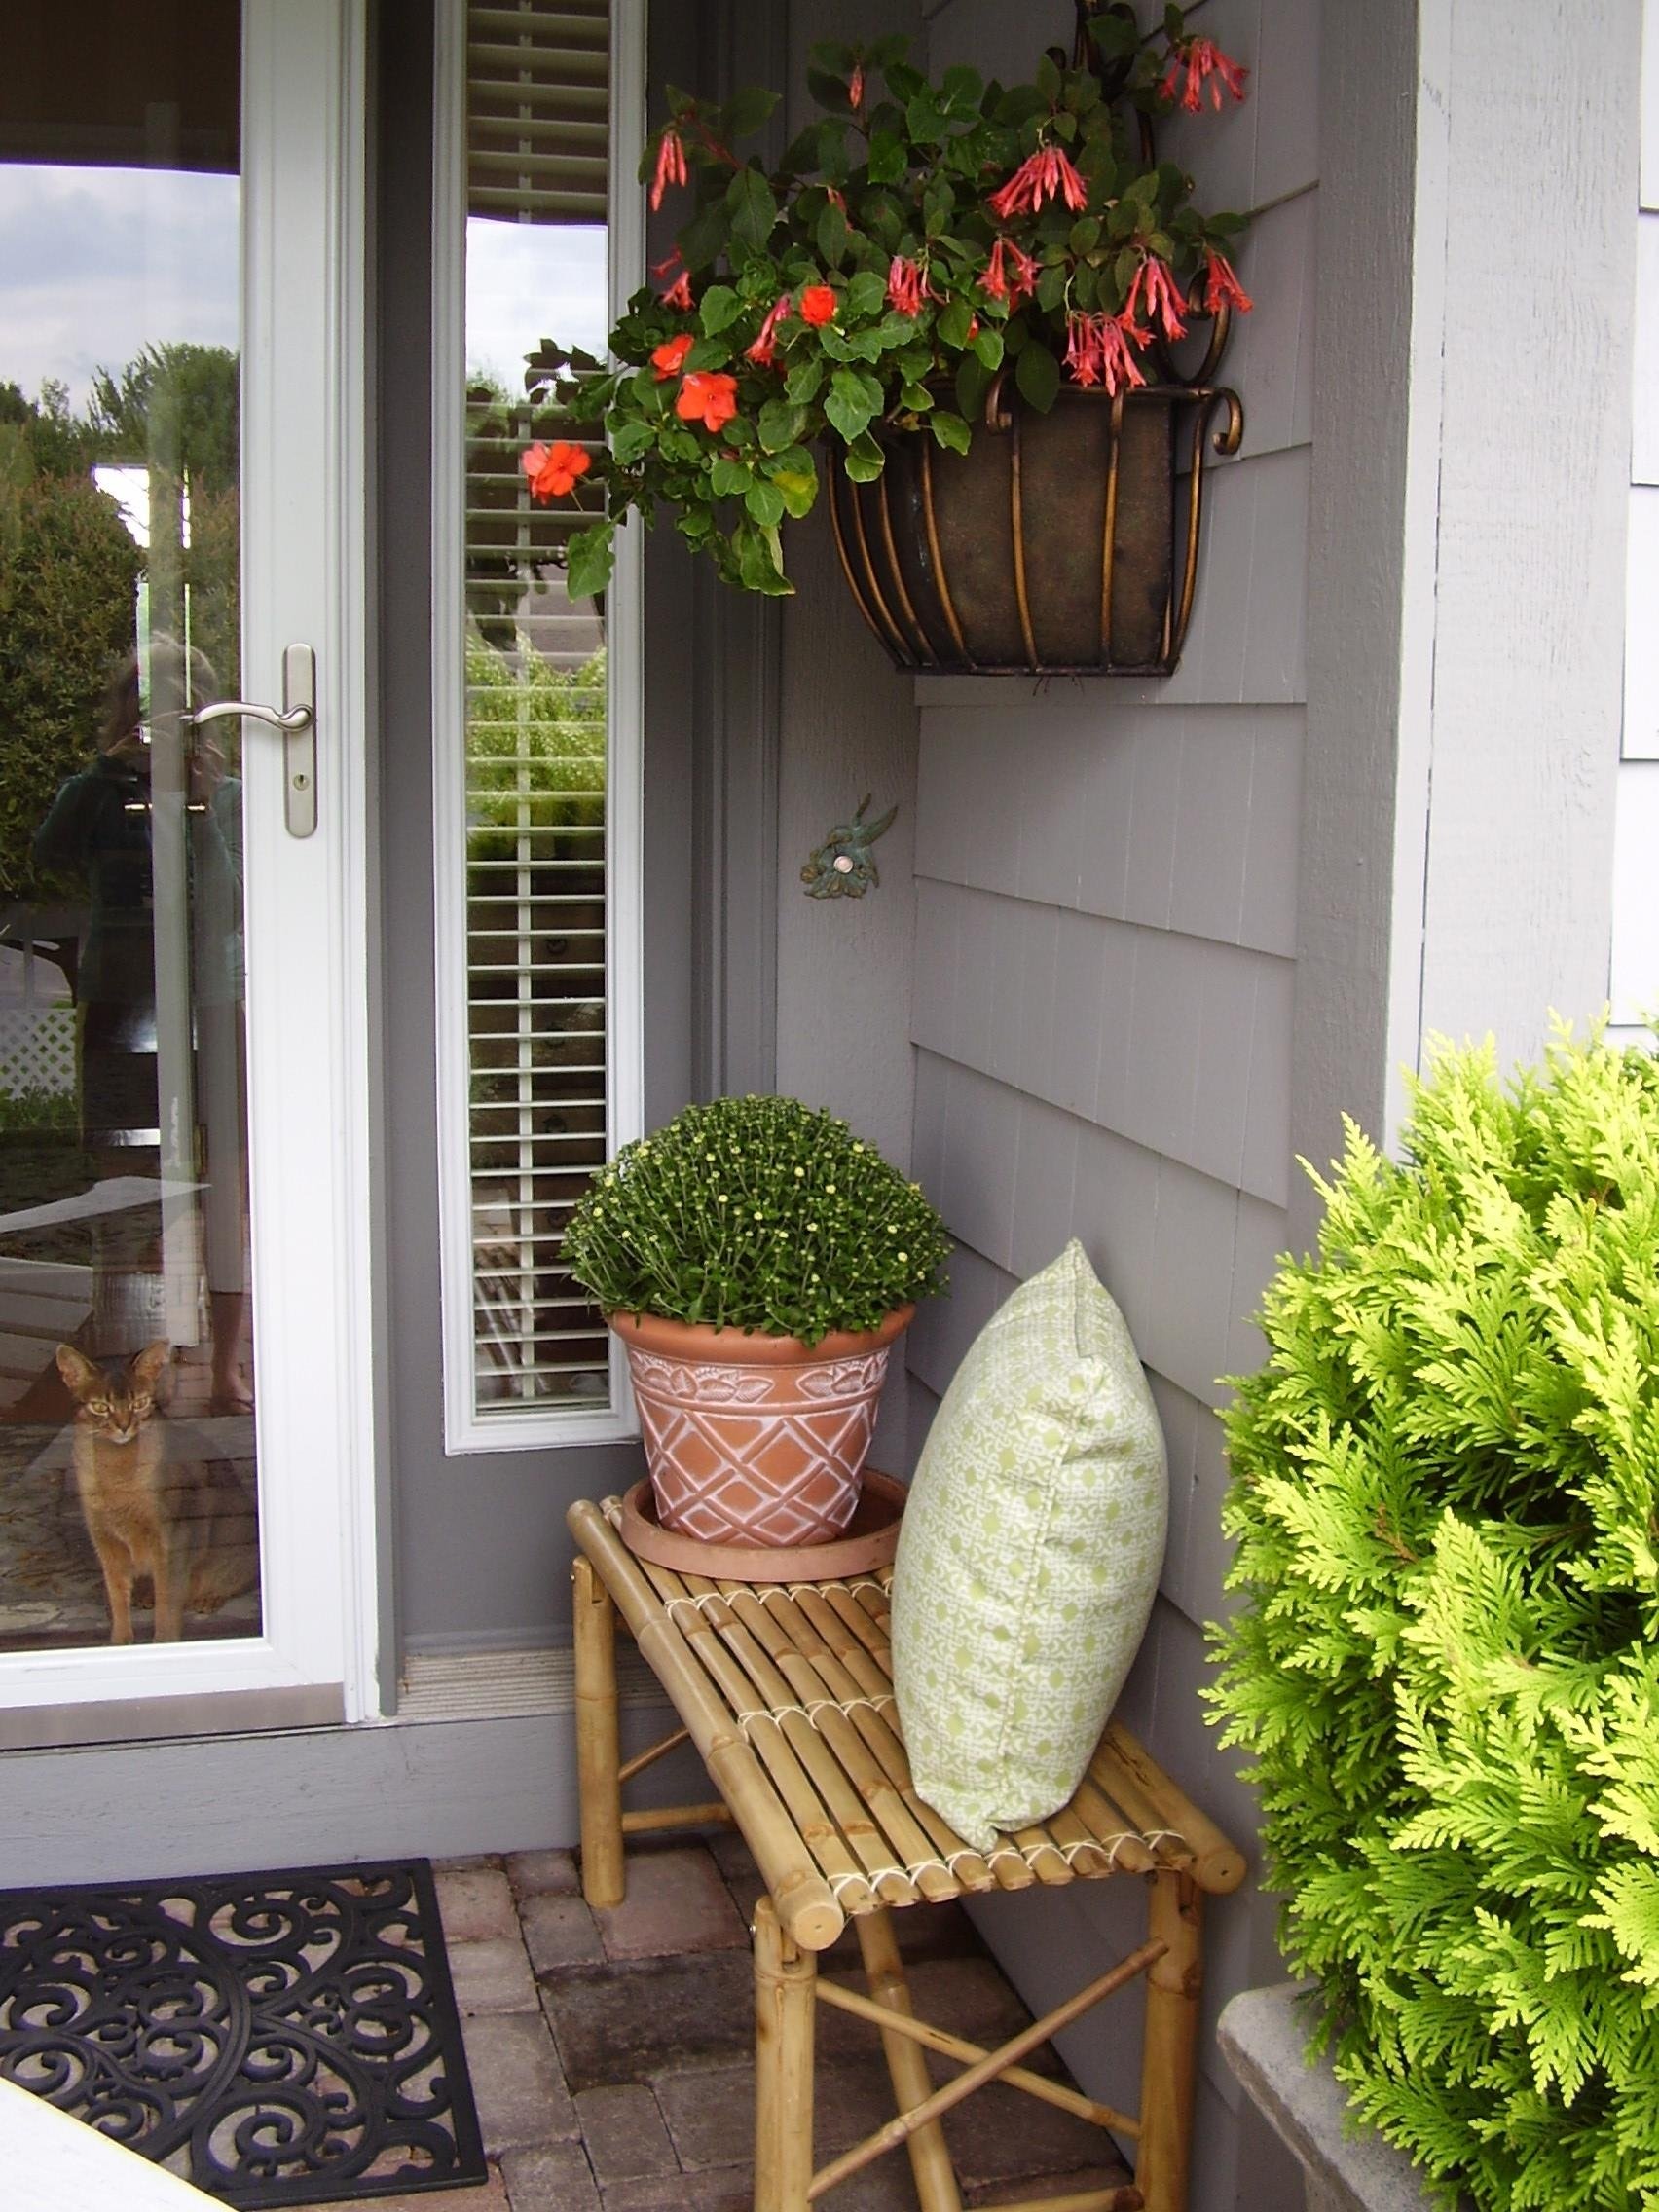 10 Trendy Porch Decorating Ideas For Summer small front porch decorating ideas for summer bjhryz com small front 2022